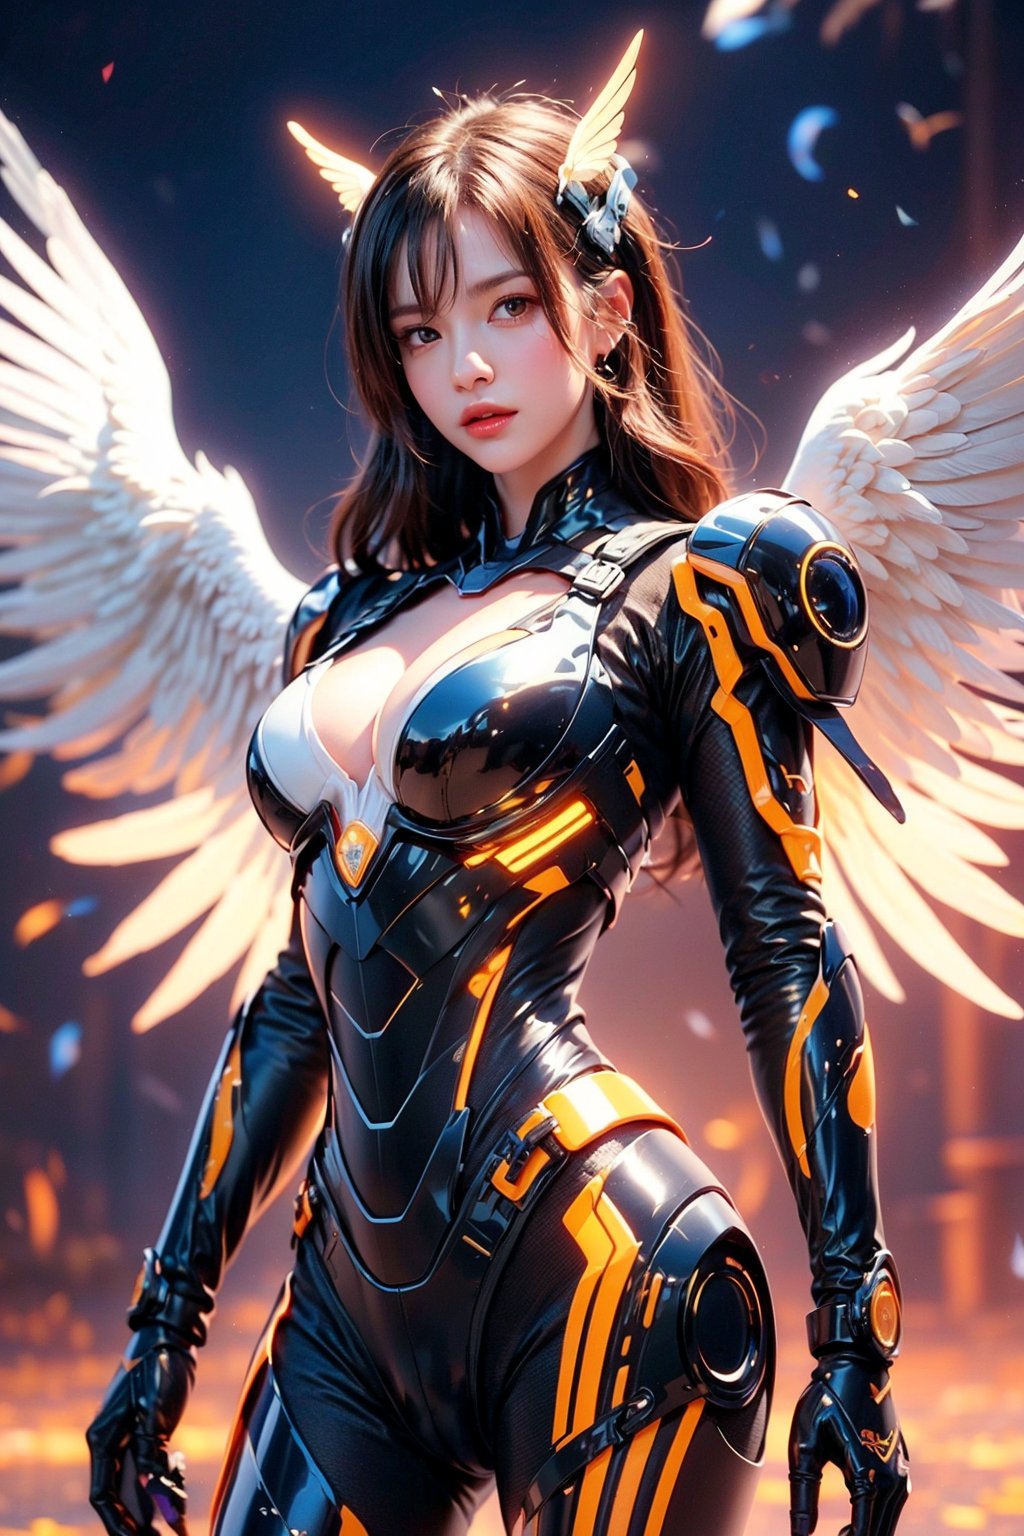 The artwork is a photorealistic digital illustration possibly by a contemporary artist. The composition features a female cyborg in a detailed white and gold exoskeleton suit with visible mechanical parts. The subject stands gracefully amidst a dynamic space background, highlighted by metallic halo-like structures, and surrounded by white doves in mid-flight, symbolizing peace and purity. The cyborg’s skin is seamlessly integrated with the mechanical components, creating a striking blend of human and machine. The detailing of the cyborg's intricate mechanical parts contrasts with the softness of the doves, set against a dark, starry backdrop dotted with planets, imparting a futuristic yet harmonious ambiance.